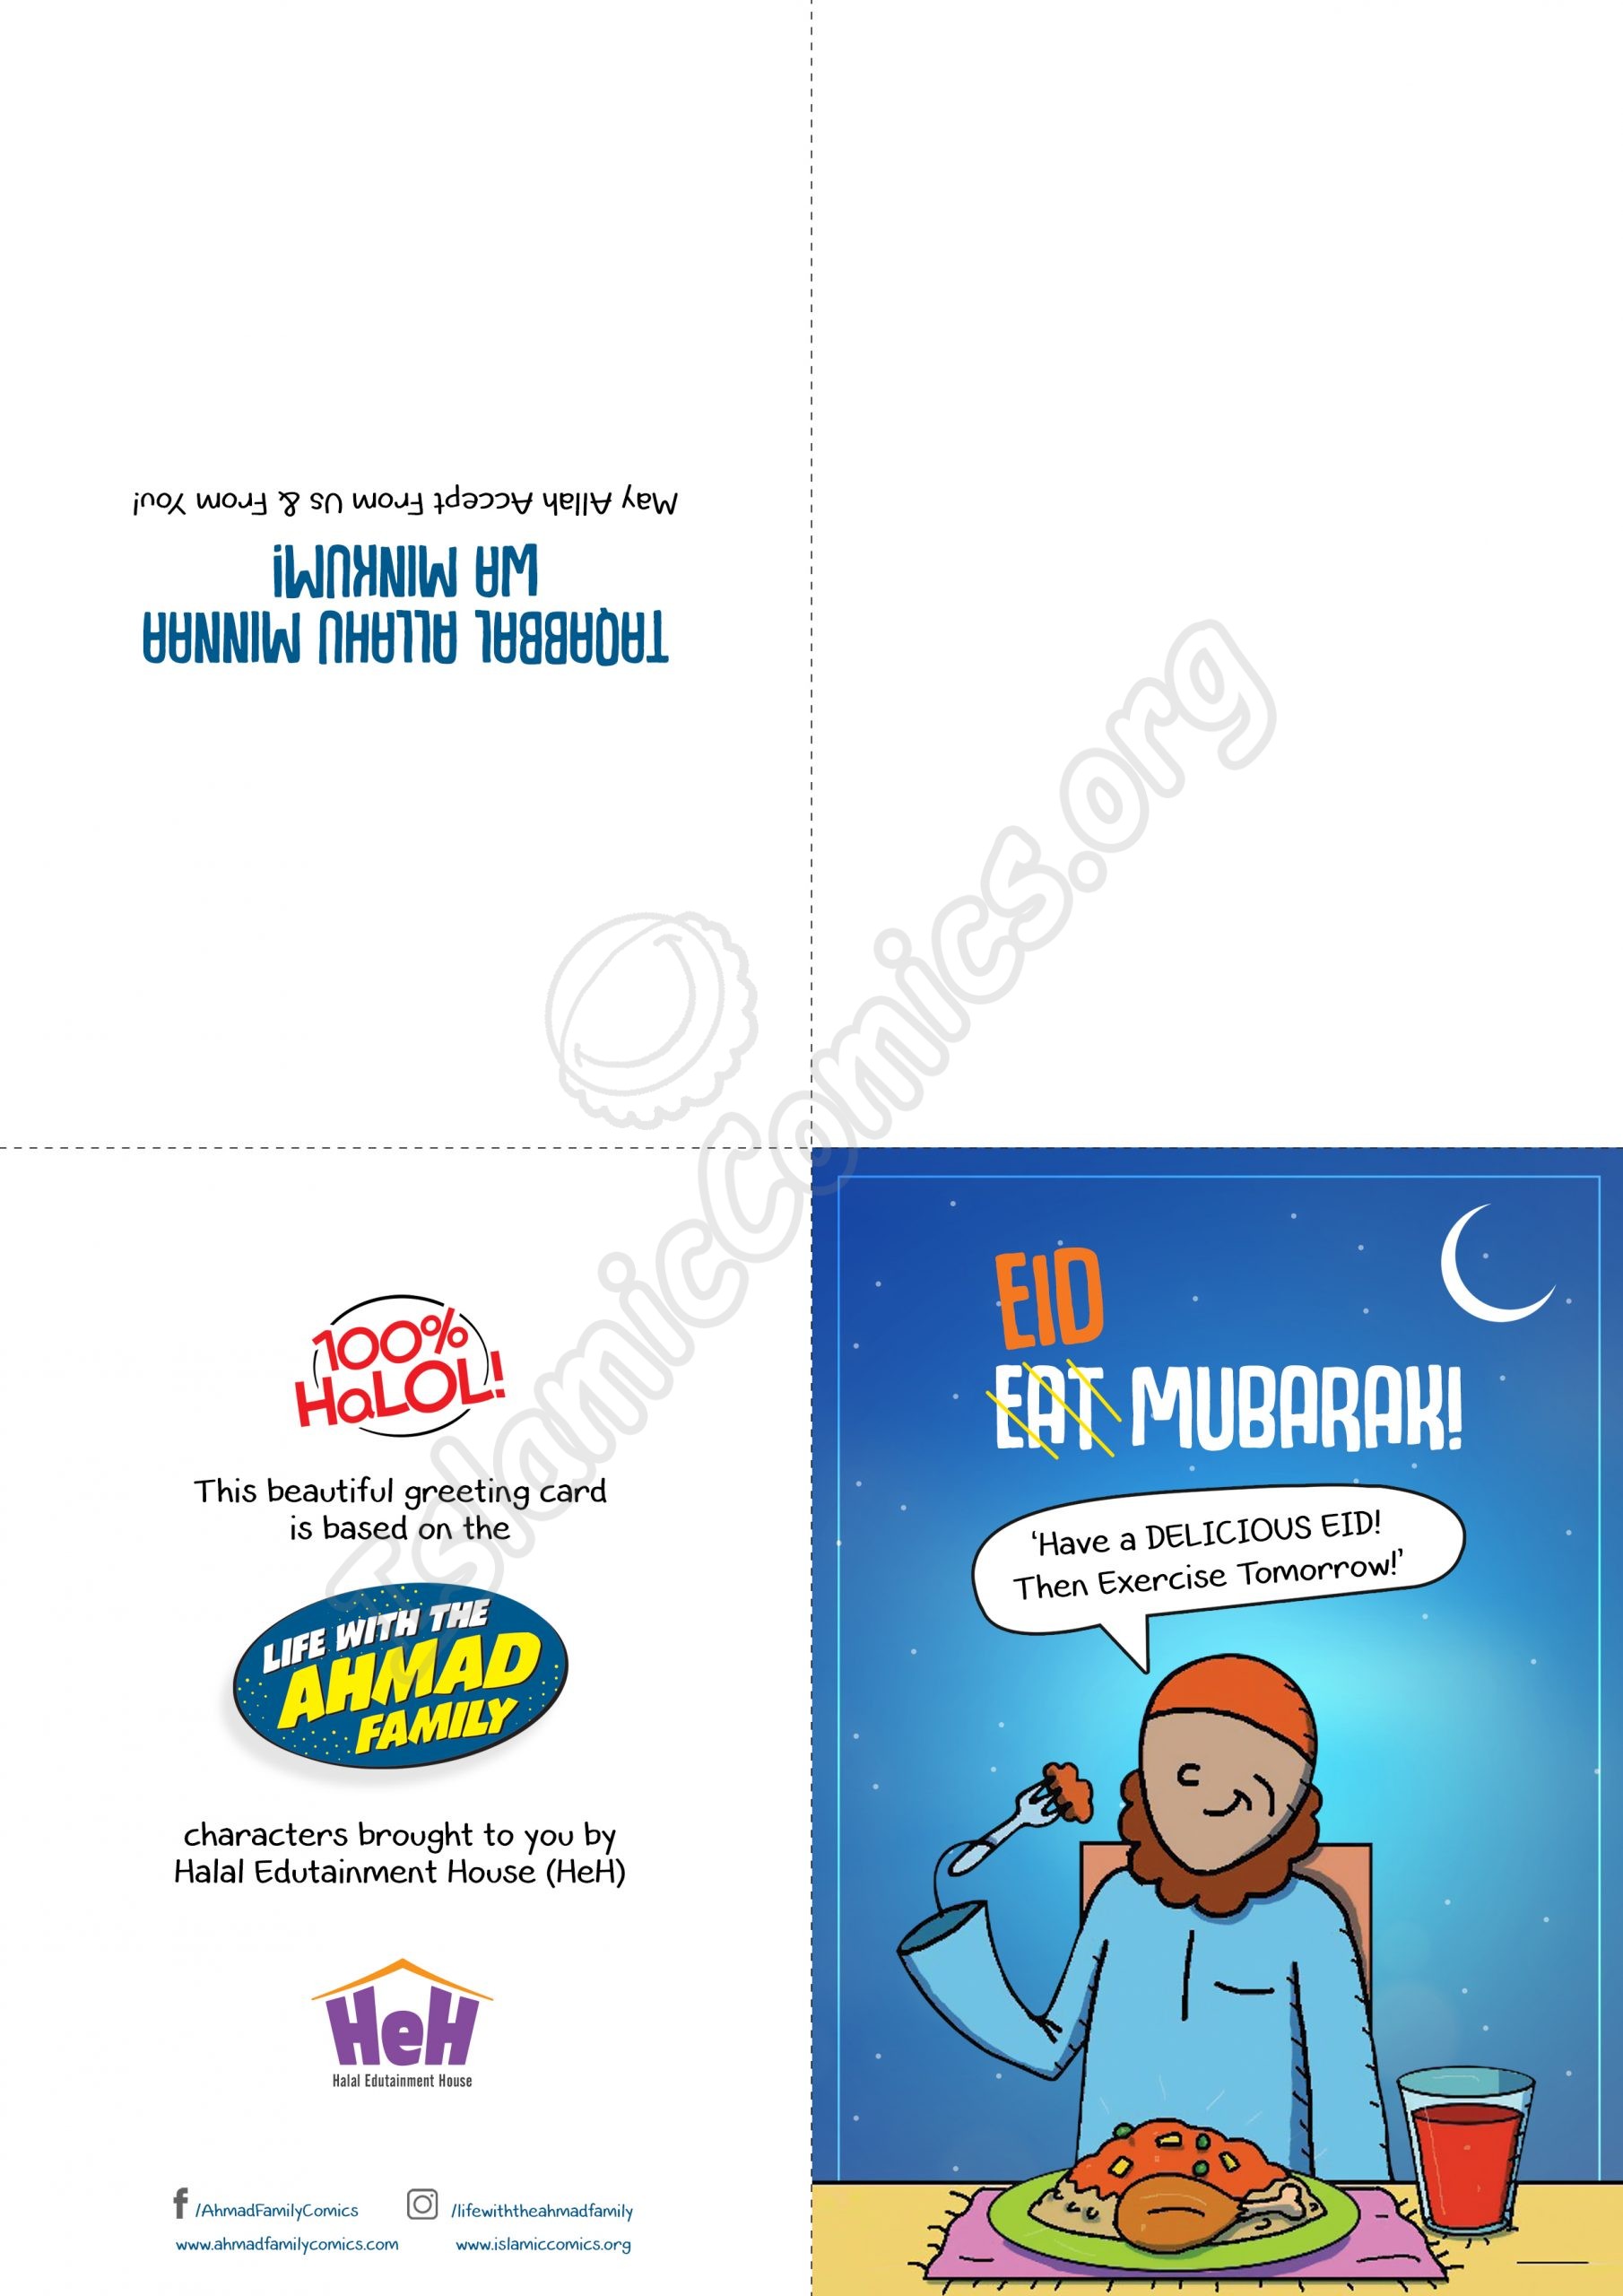 Have a Delicious 'Eid! - Printable Eid Greeting Card (Islamic Greeting Cards)